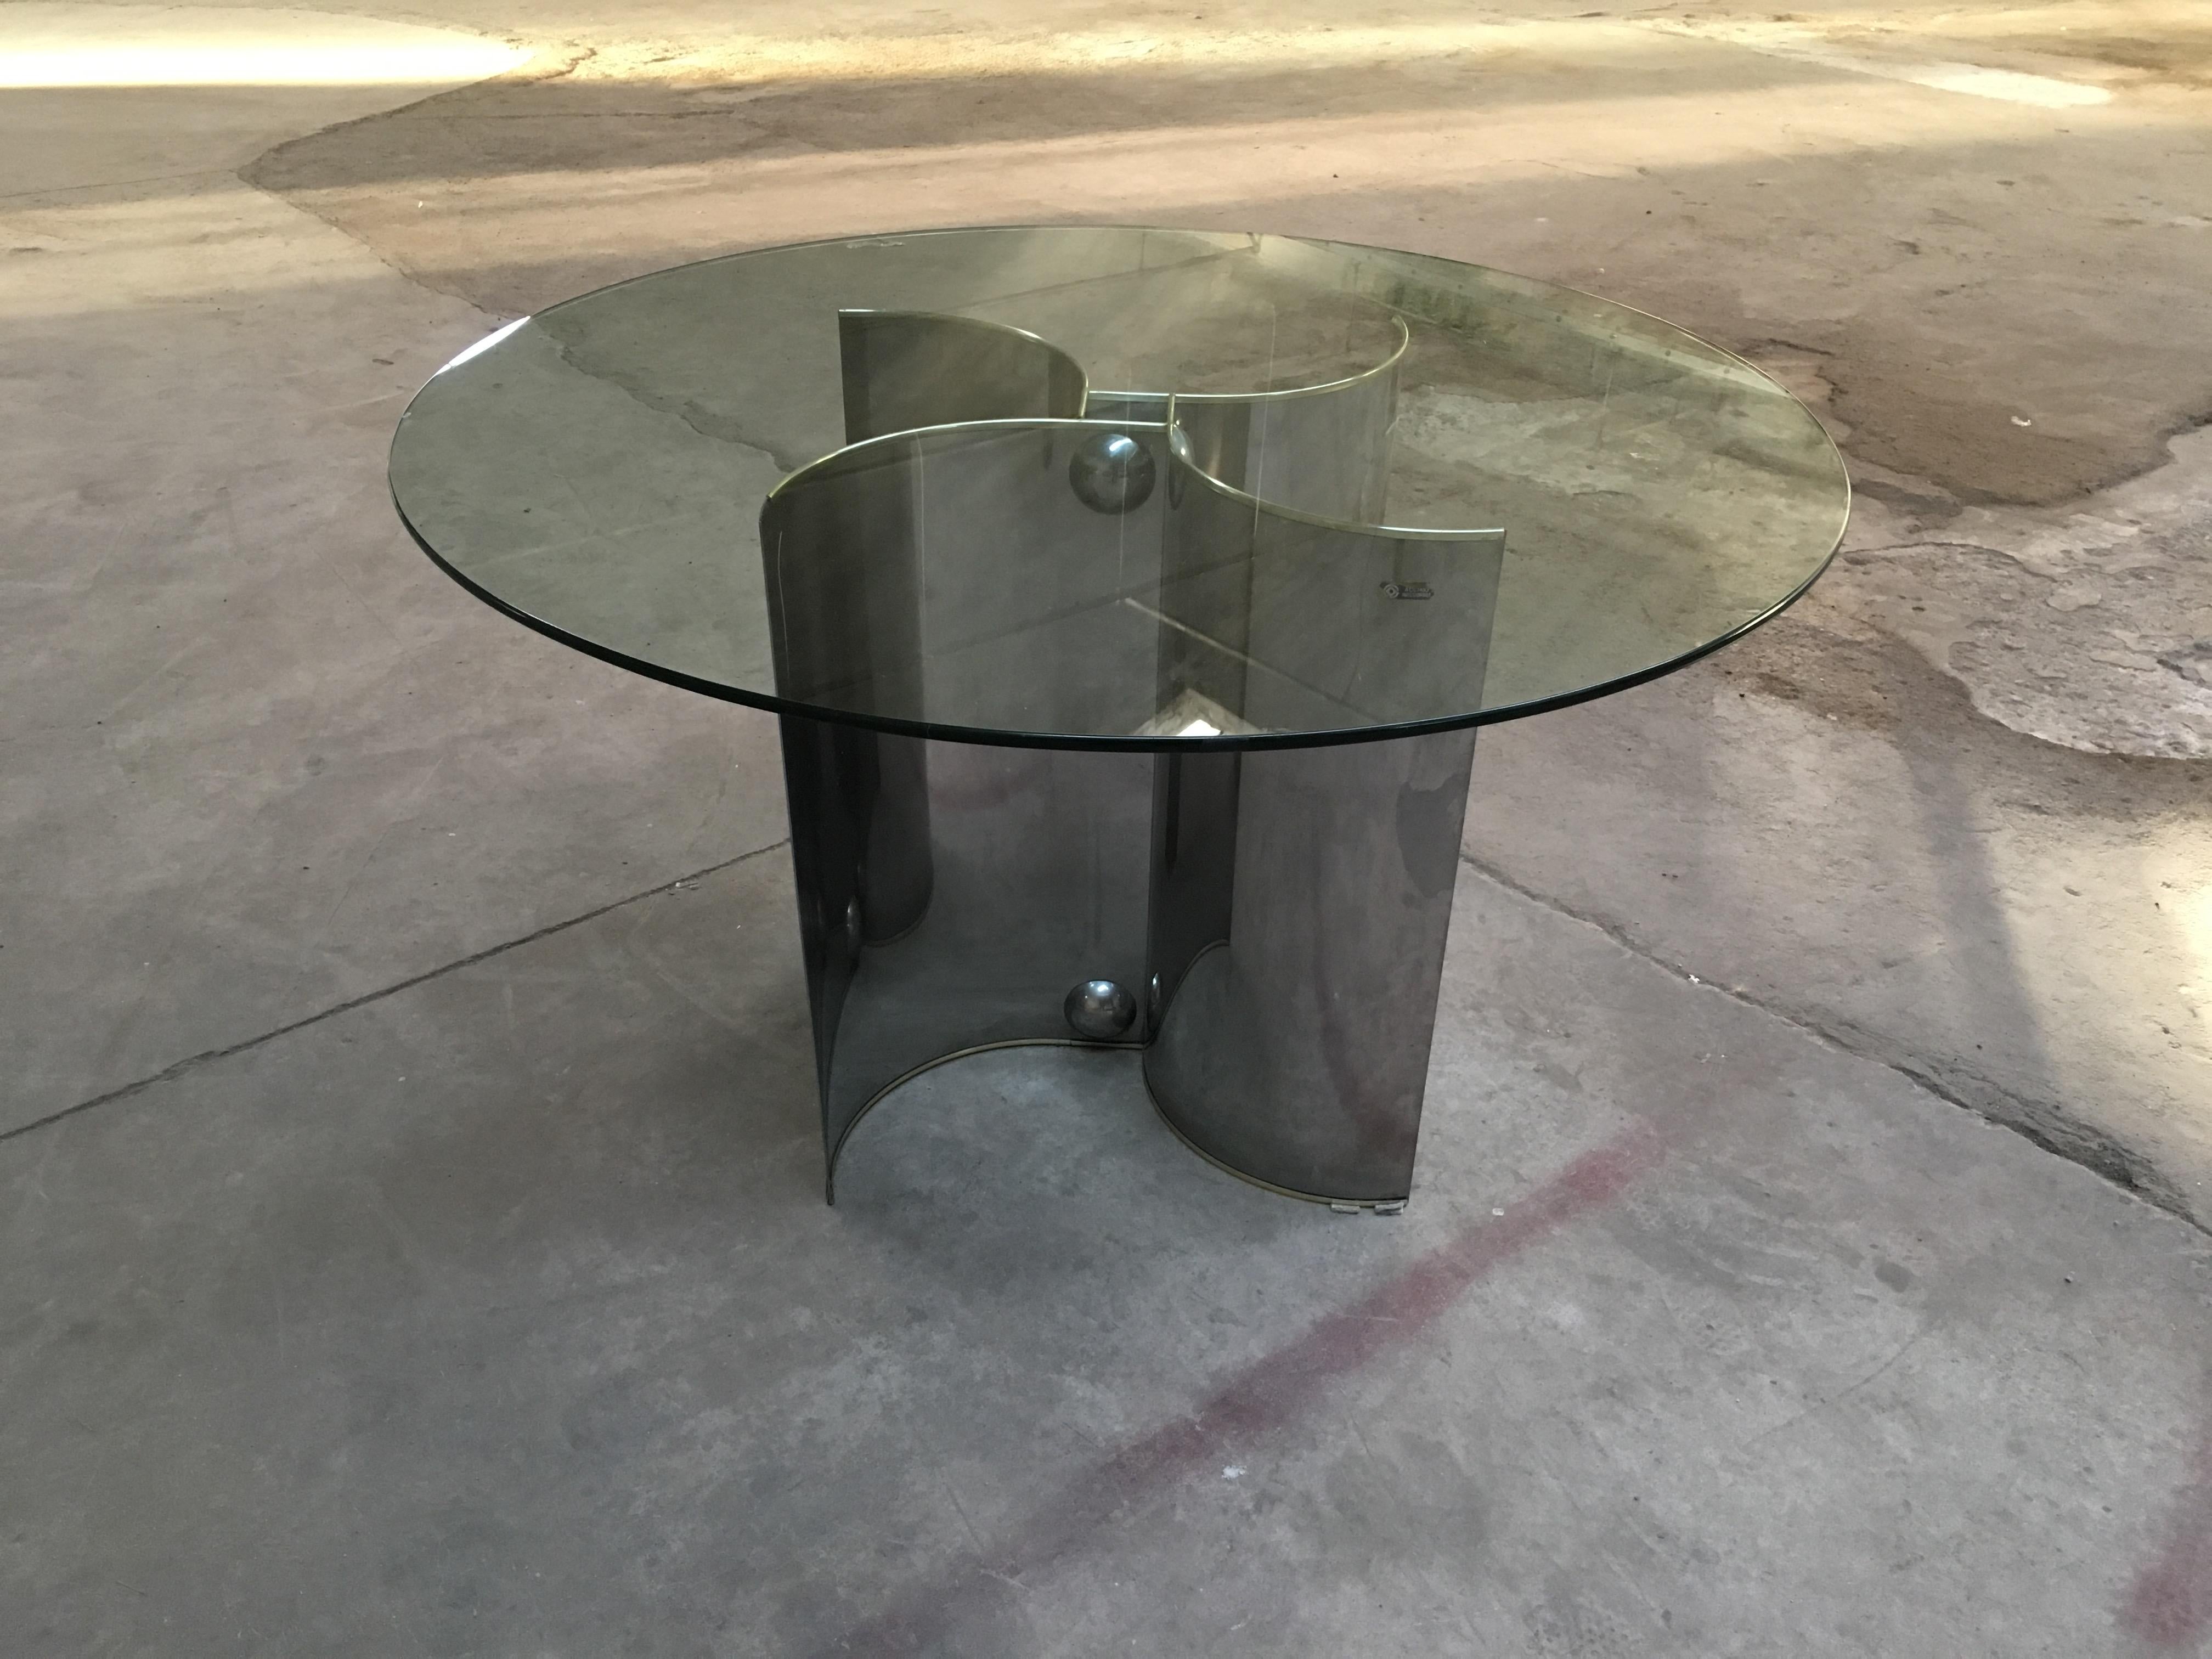 Mid-Century Modern Italian chrome stainless steel dining or center table with glass top and brass edges.
Table base measurements: cm. 60 x 60
Glass top measurements: Diameter cm. 130.